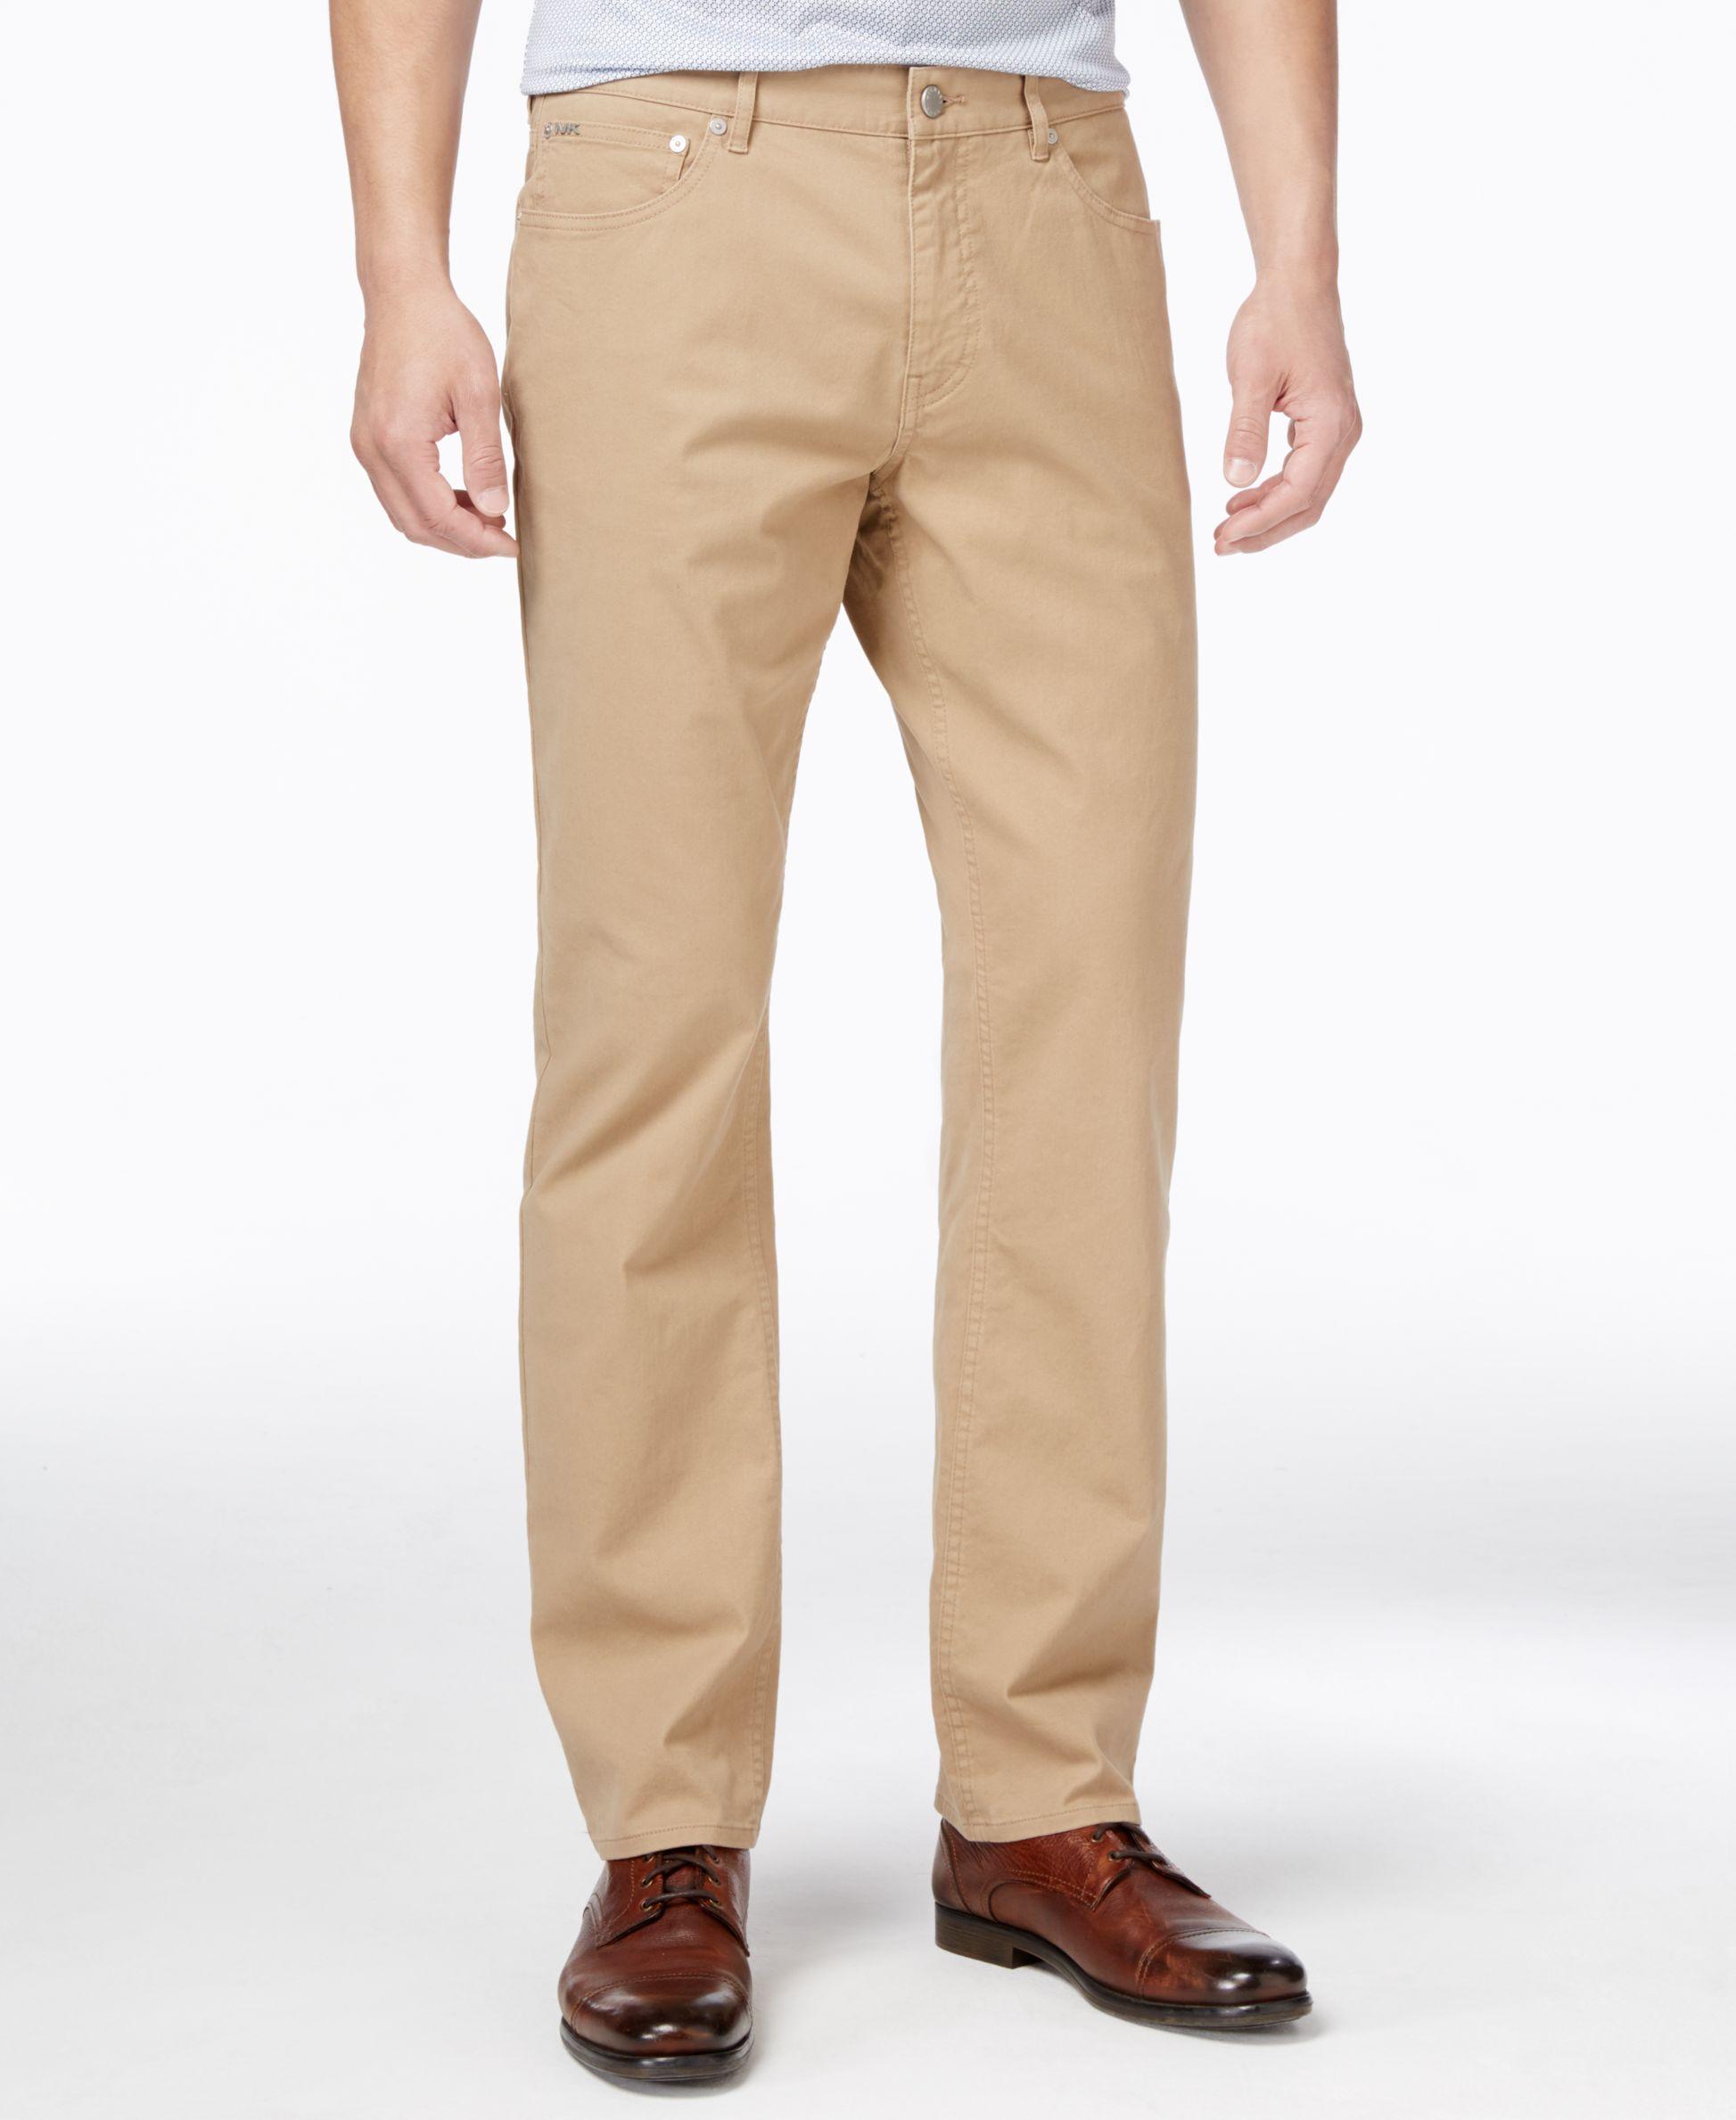 Lyst - Michael Kors Men's Stretch Twill Pants in Natural for Men